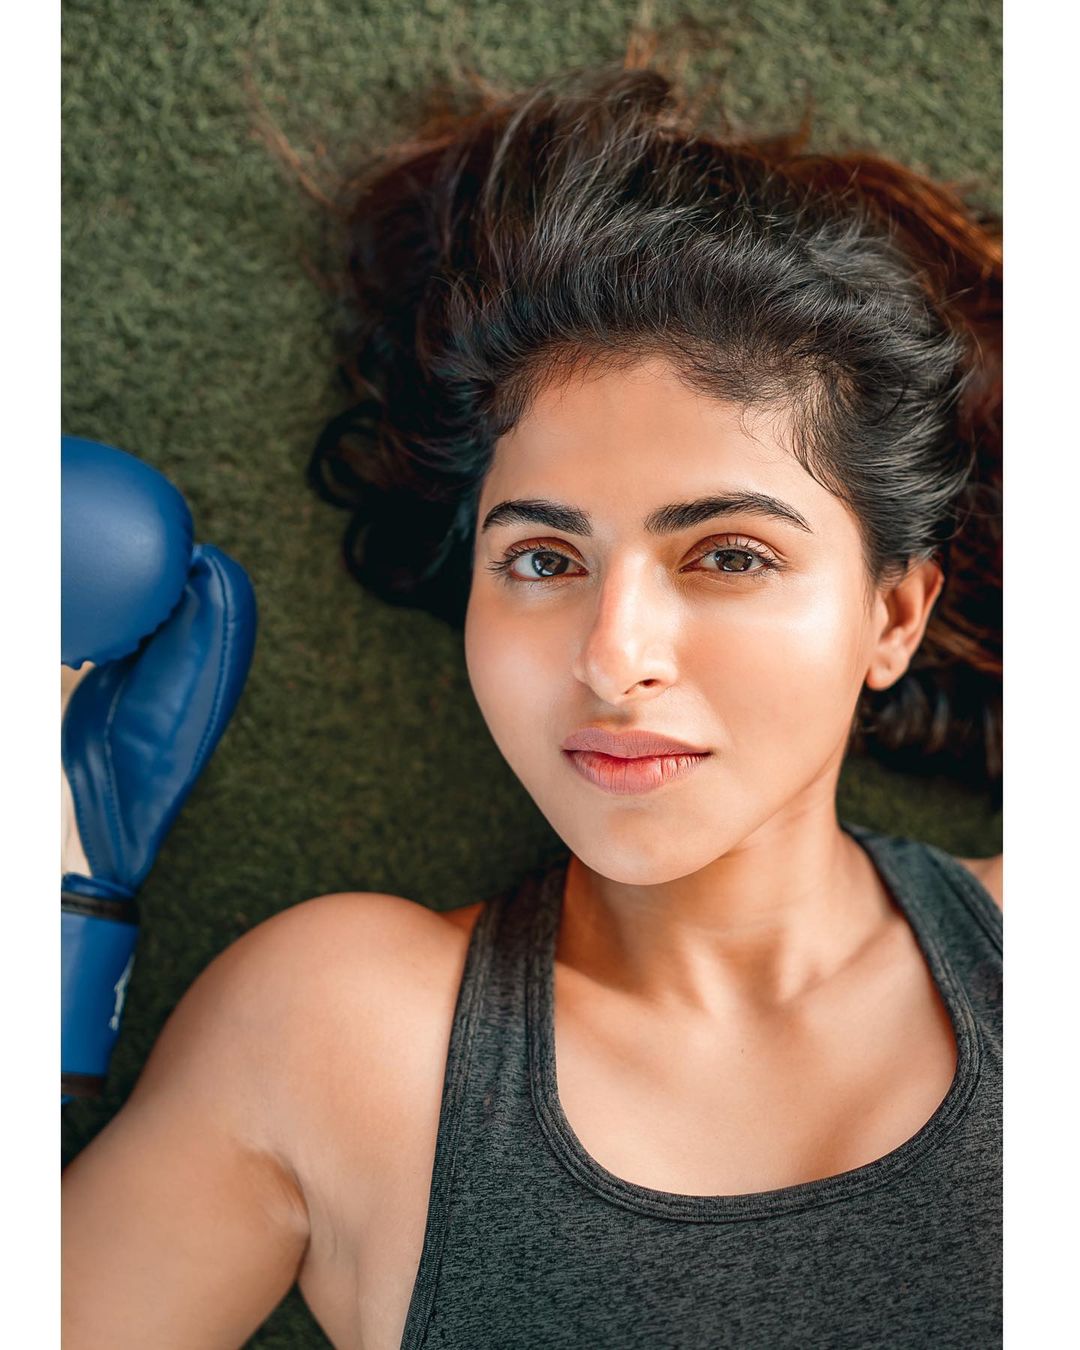 iswarya menon hot photos post work out getting trending